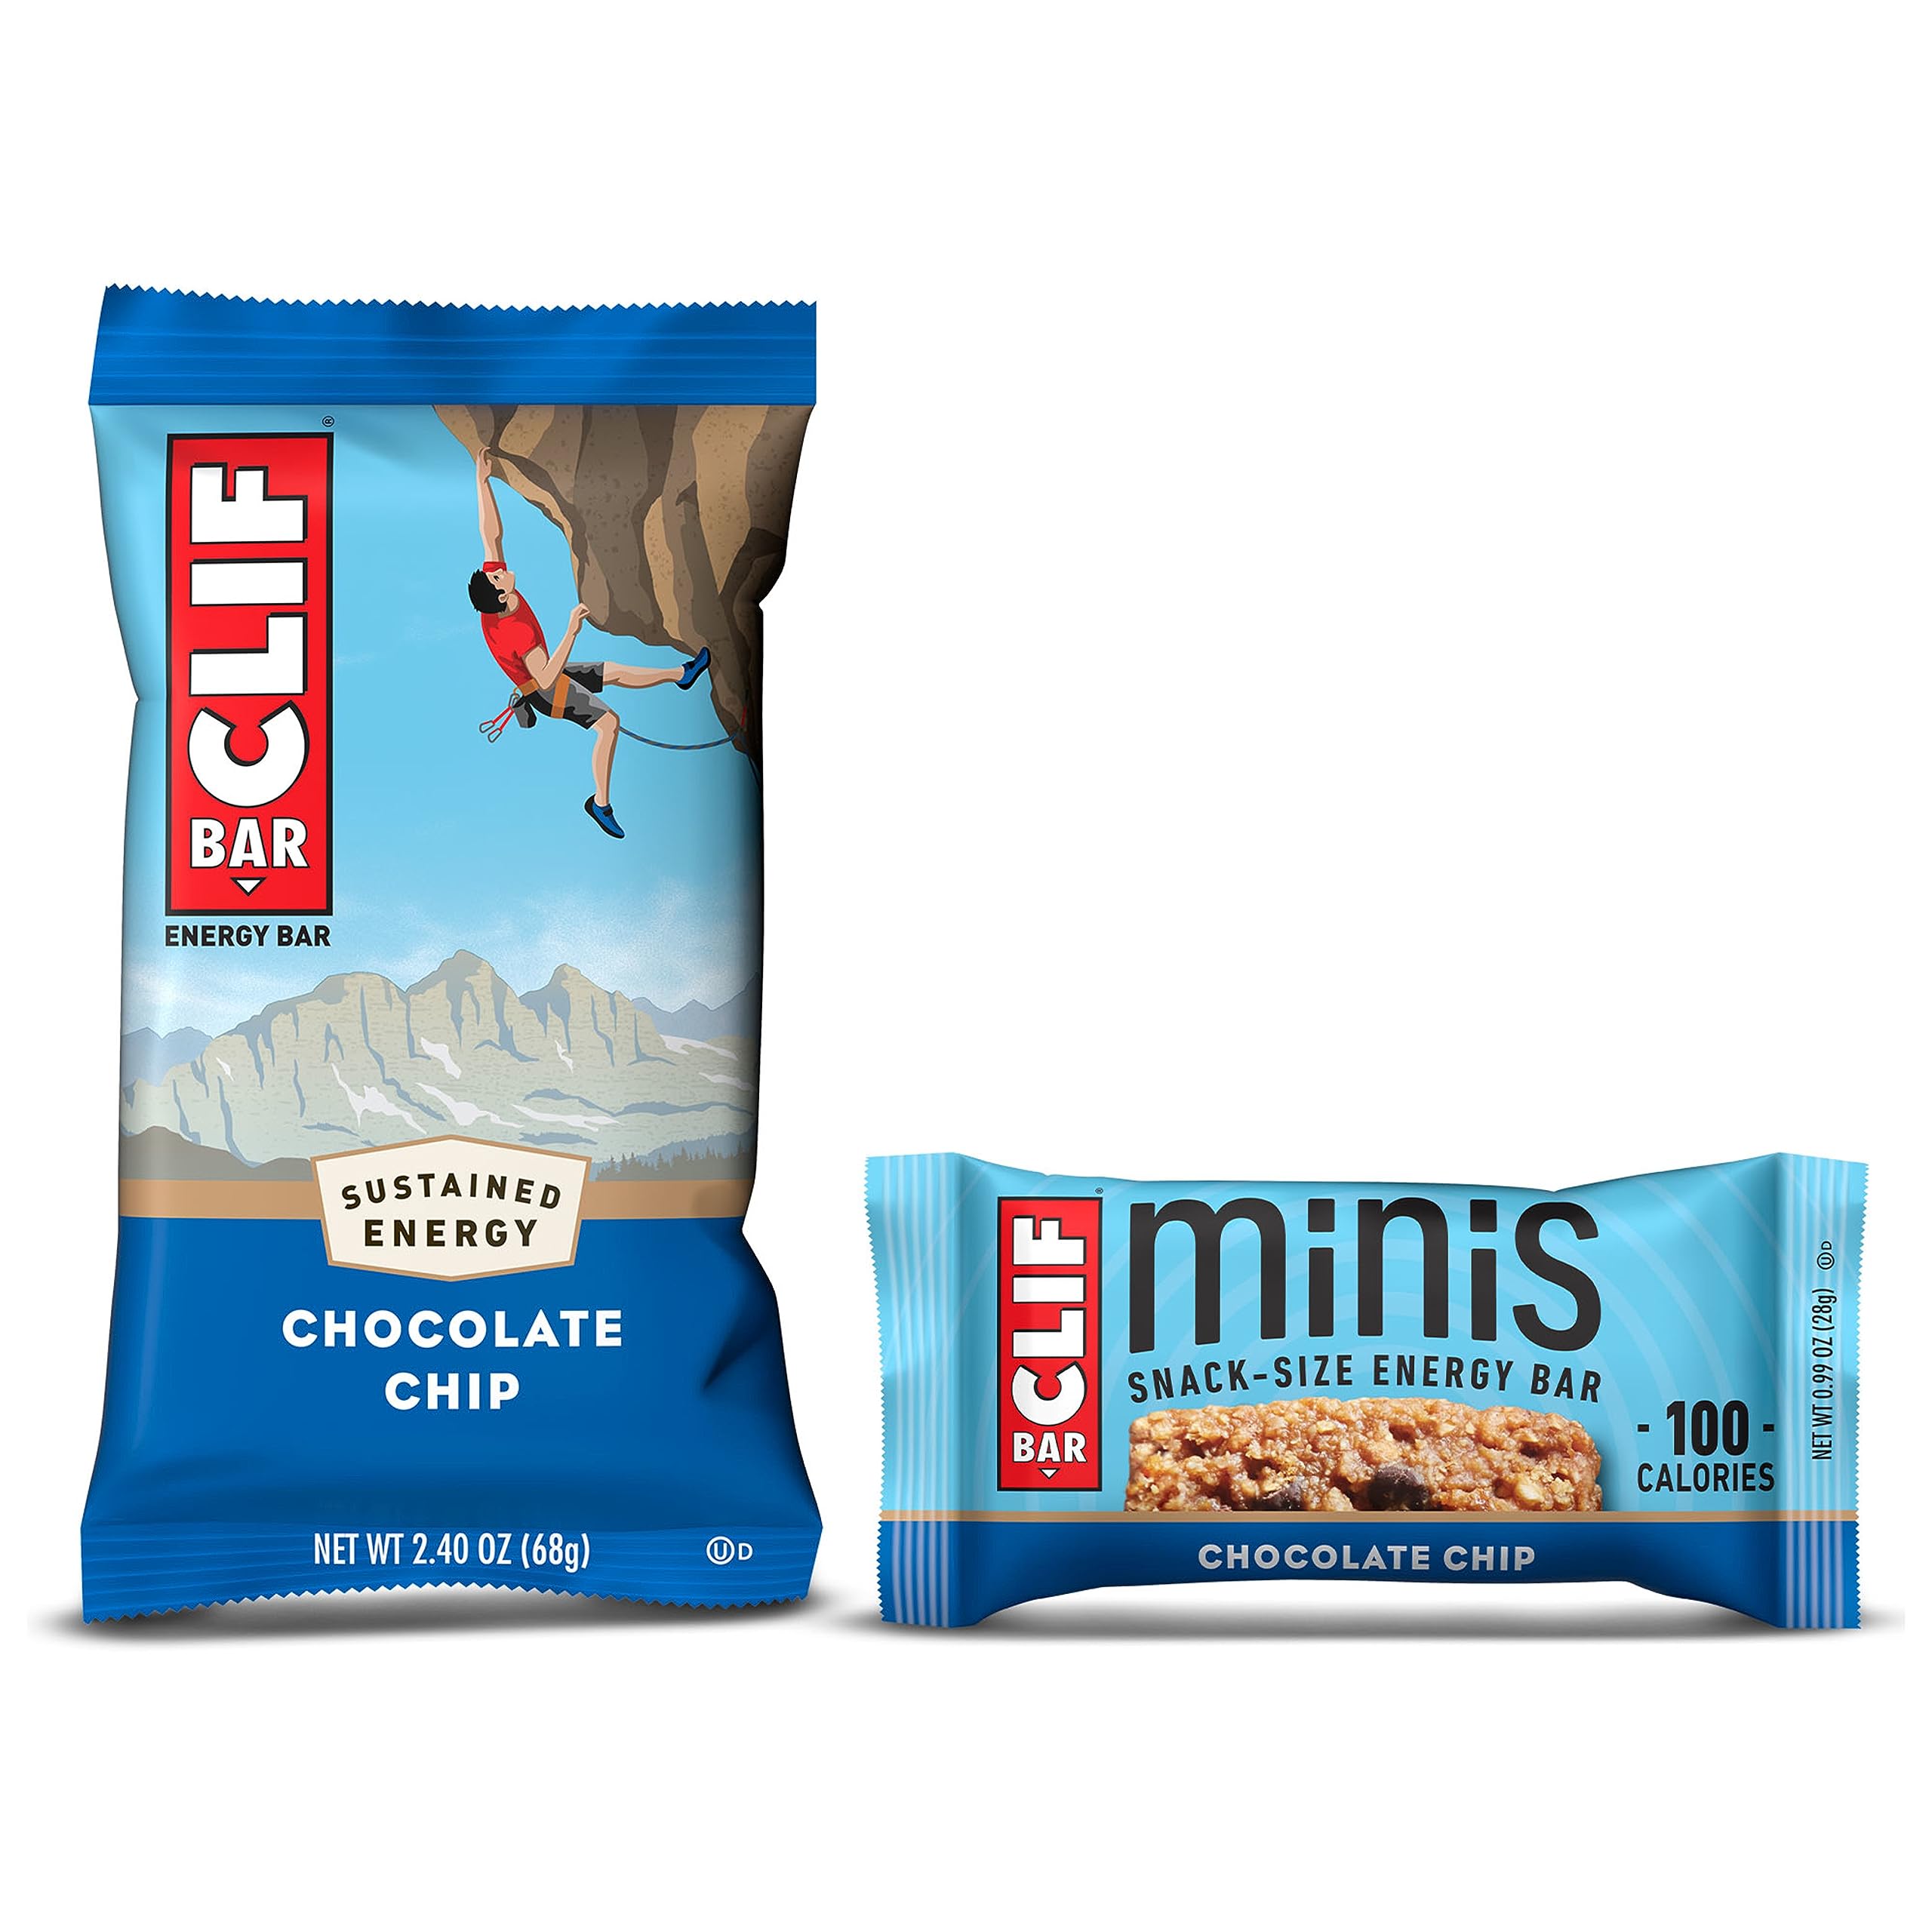 CLIF BAR - Chocolate Chip - Full Size and Mini Energy Bars - Packaging & Assortment May Vary - Amazon Exclusive - 2.4 oz. and 0.99 oz. (20 Count)